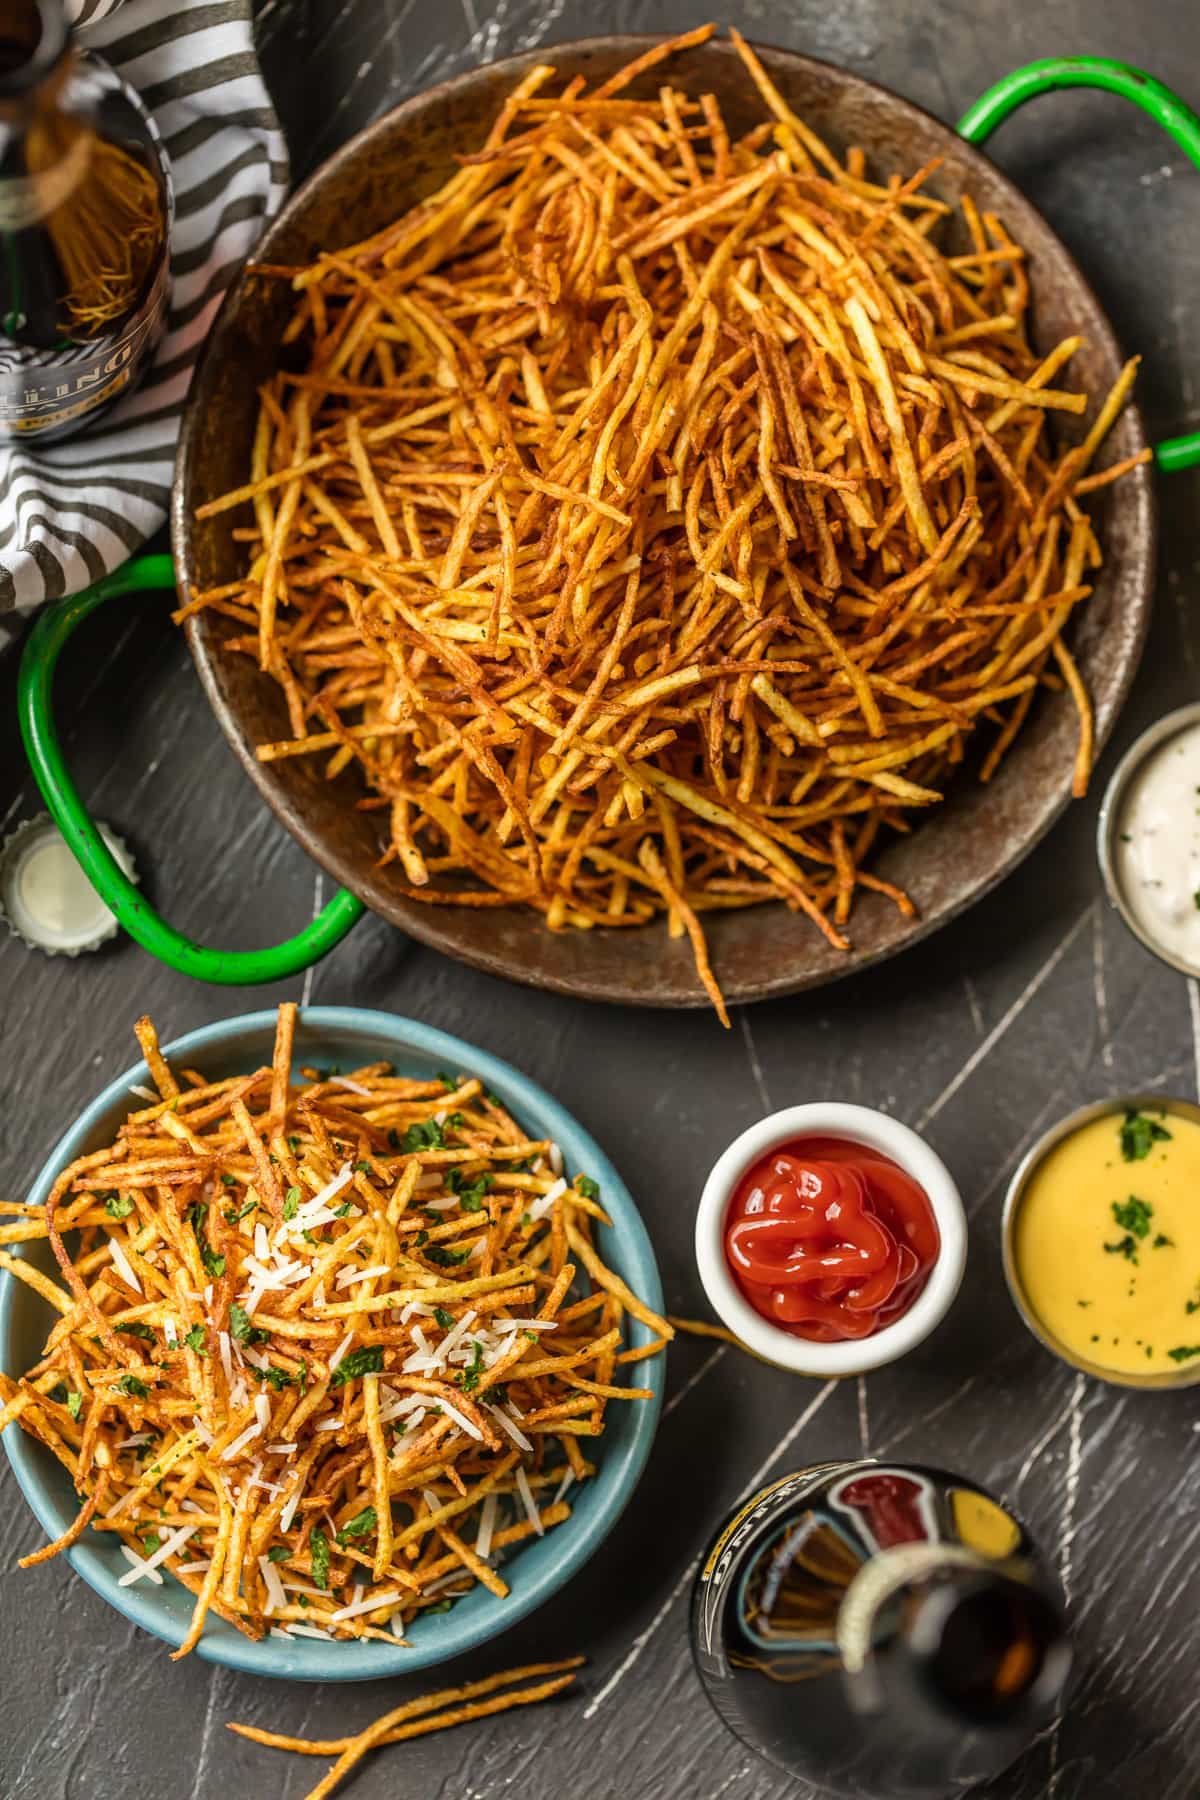 Shoestring Fries are the perfect side for sandwiches to bbq to so much more! We love these fun Shoestring Potatoes that are super thin and deep fried. They're crispy, customizable, and delicious. Once we show you how to make shoestring fries you'll never make fries the same way again. We love to make ours Garlic Parmesan Fries! So delicious and fun.